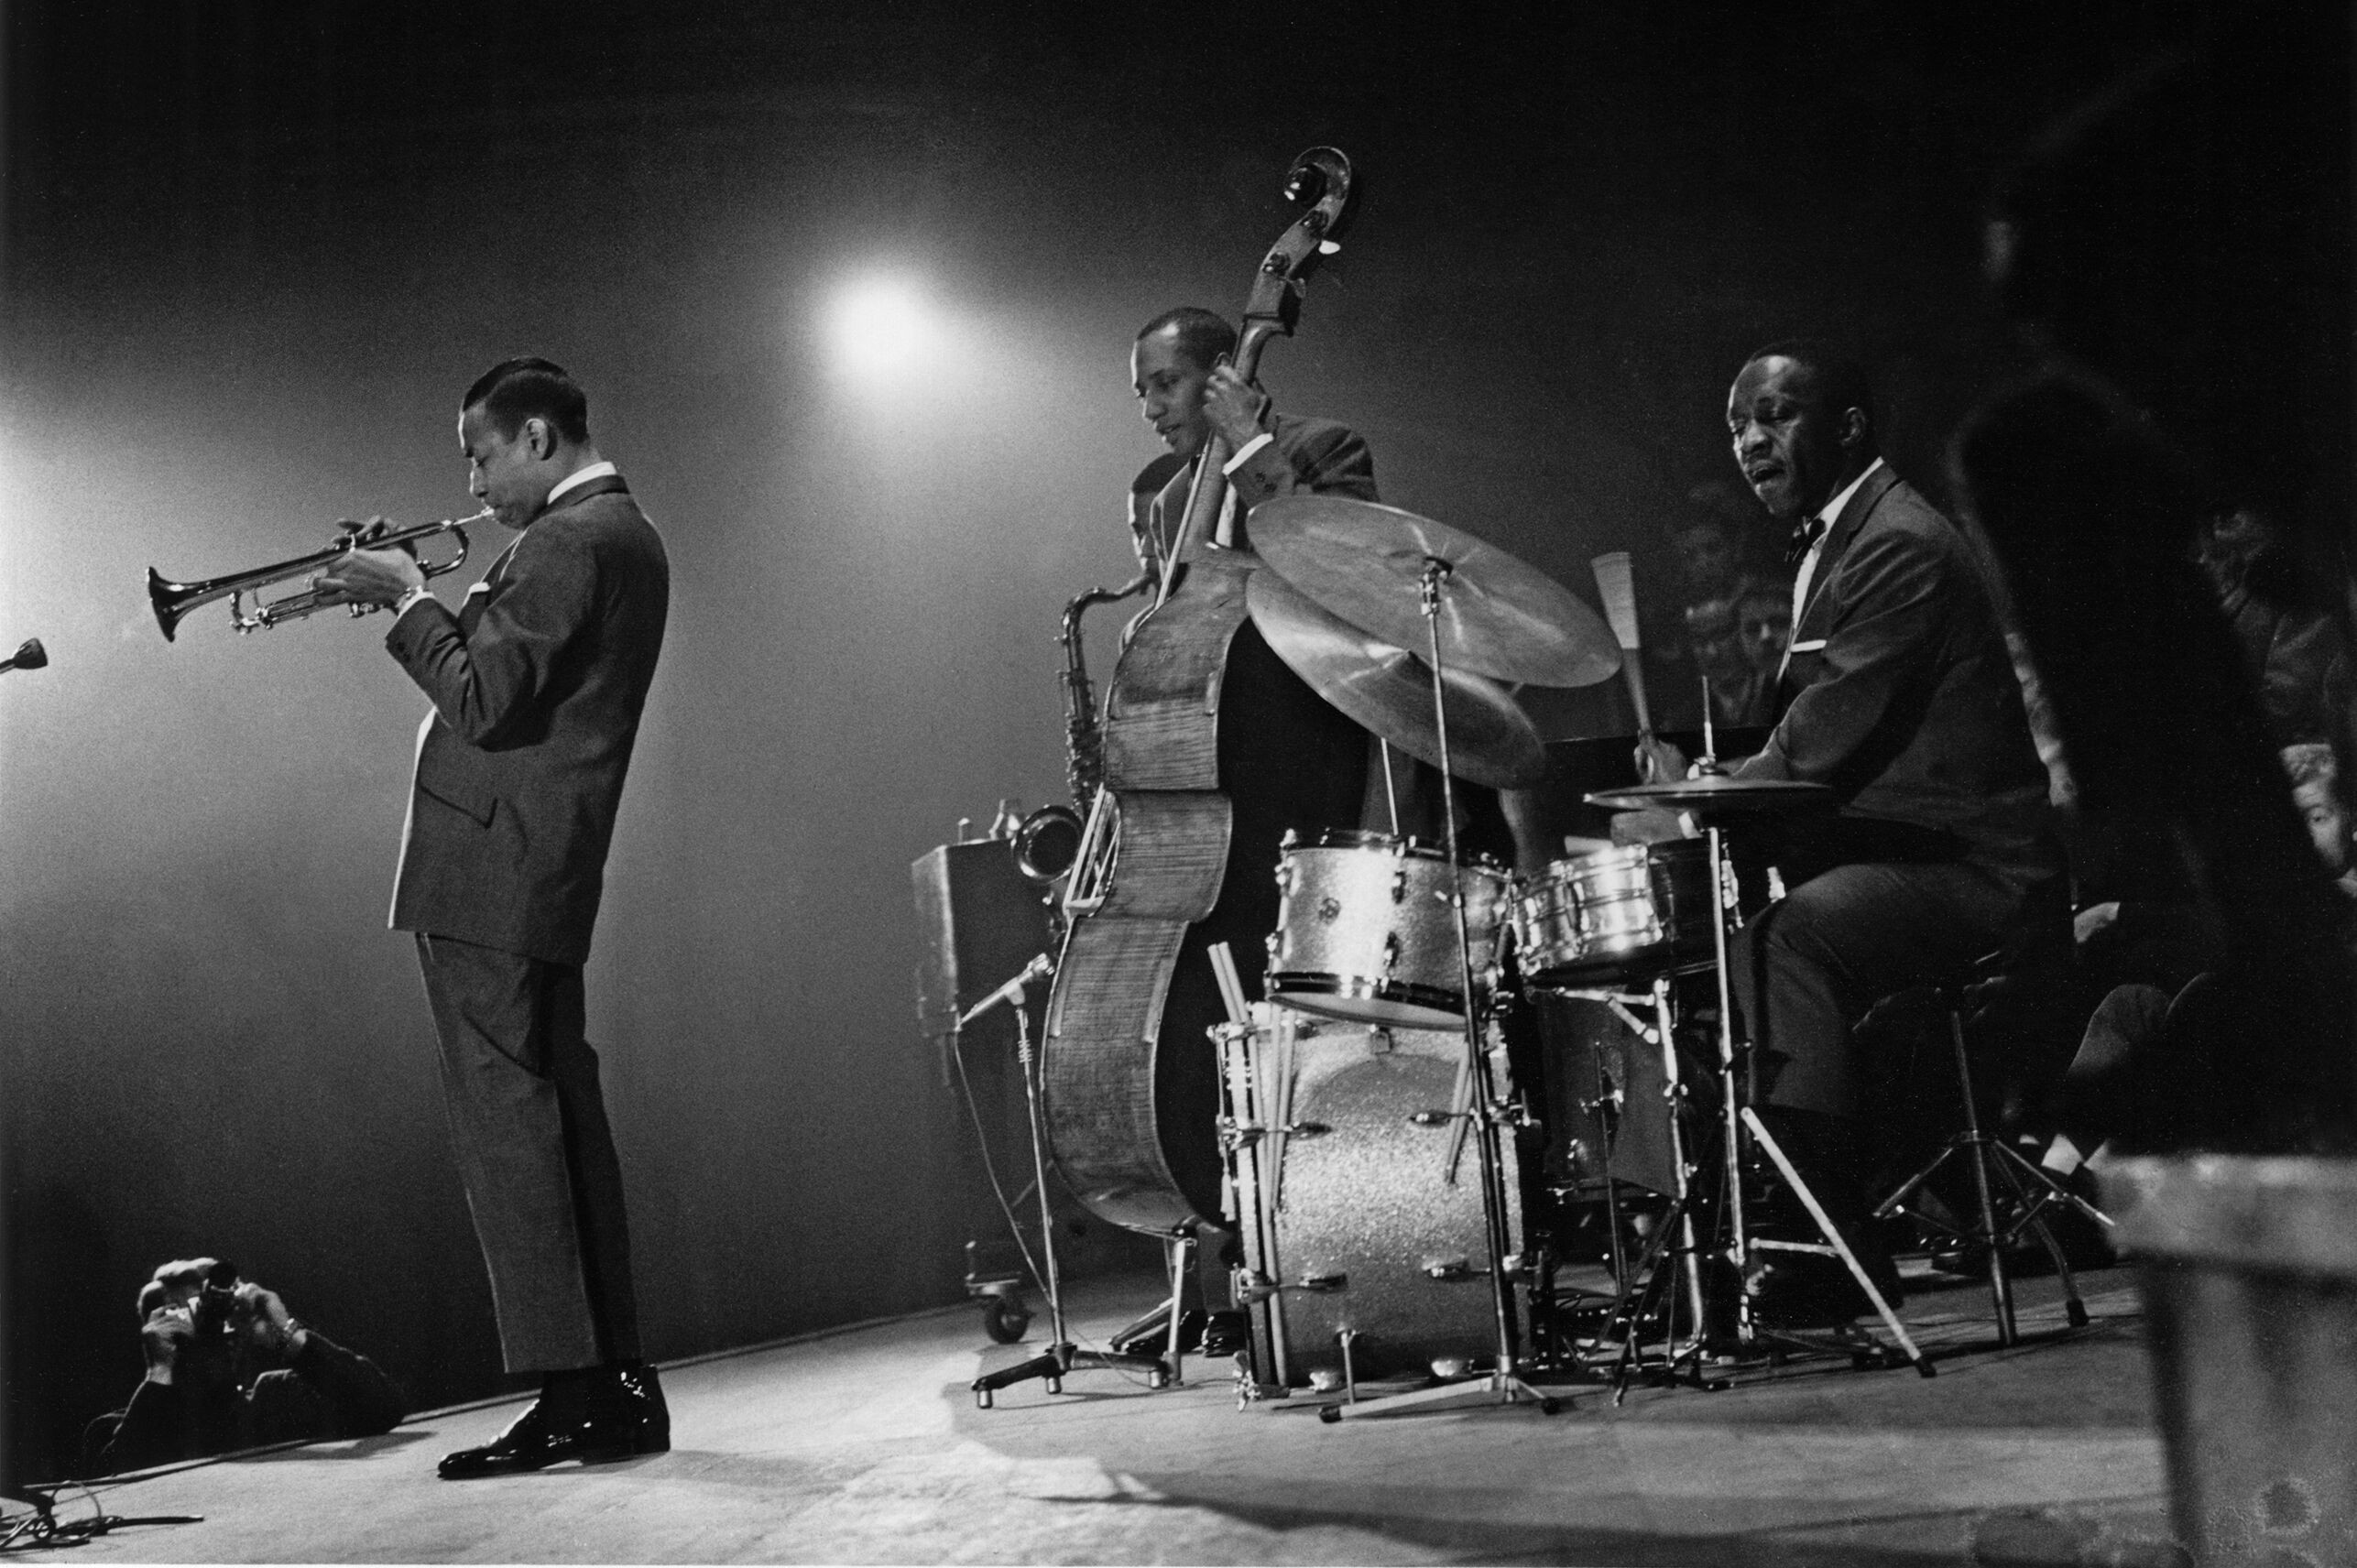 The subject of Kasper Collin’s exquisitely haunted documentary meditation I Called Him Morgan is hard-bop trumpeter Lee Morgan, who performs with drummer Art Blakey and the Jazz Messengers in 1960 in Amsterdam. - © BEN VAN MEERENDONK/INTERNATIONAL INSTITUTE FOR SOCIAL HISTORY. COURTESY OF FILMRISE/SUBMARINE DELUXE/KASPER COLLIN PRODUKTION AB